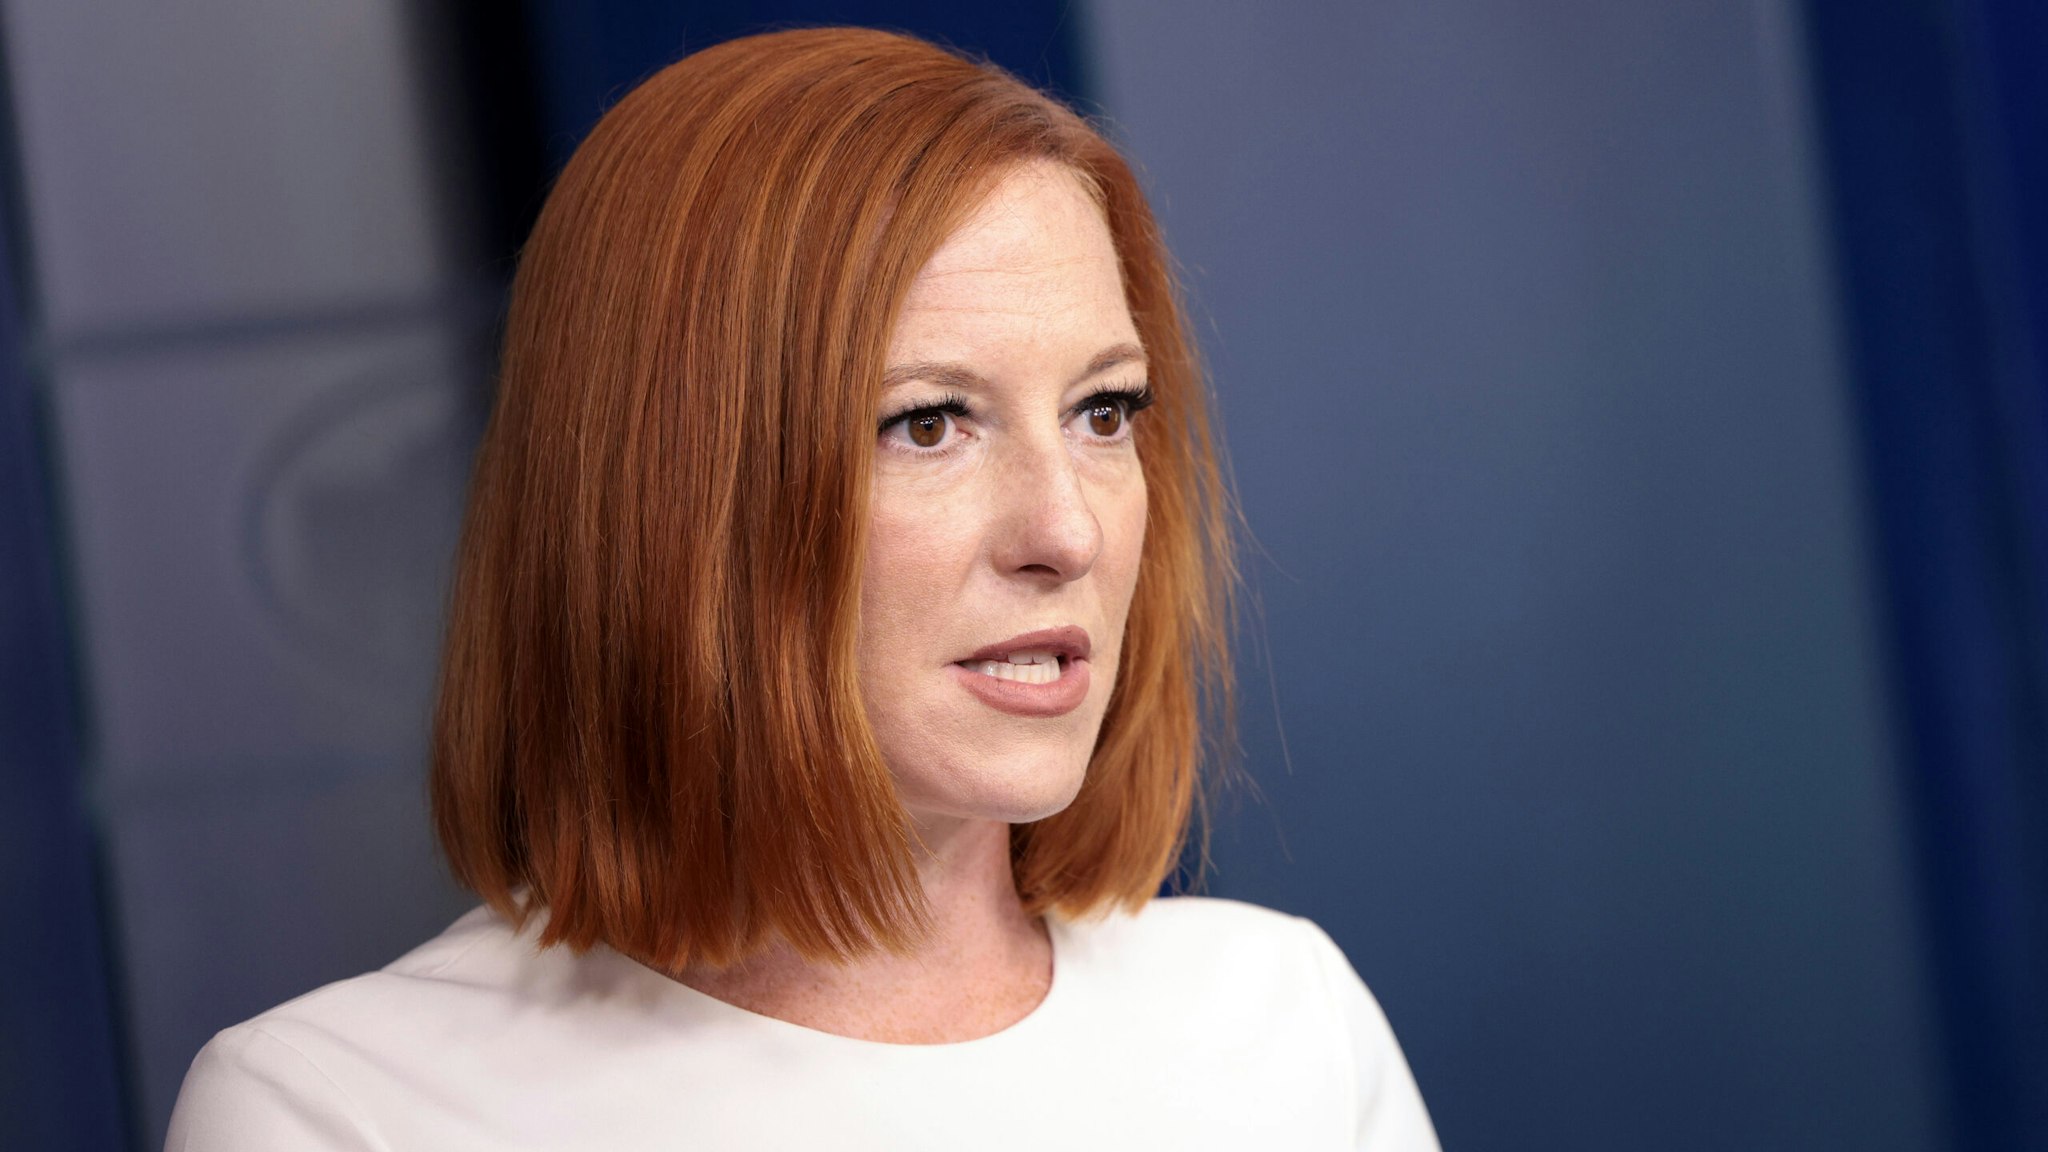 WASHINGTON, DC - SEPTEMBER 08: White House Press Secretary Jen Psaki speaks during a press briefing at the White House on September 08, 2021 in Washington, DC. Psaki spoke on the COVID-19 pandemic and the Texas abortion law.